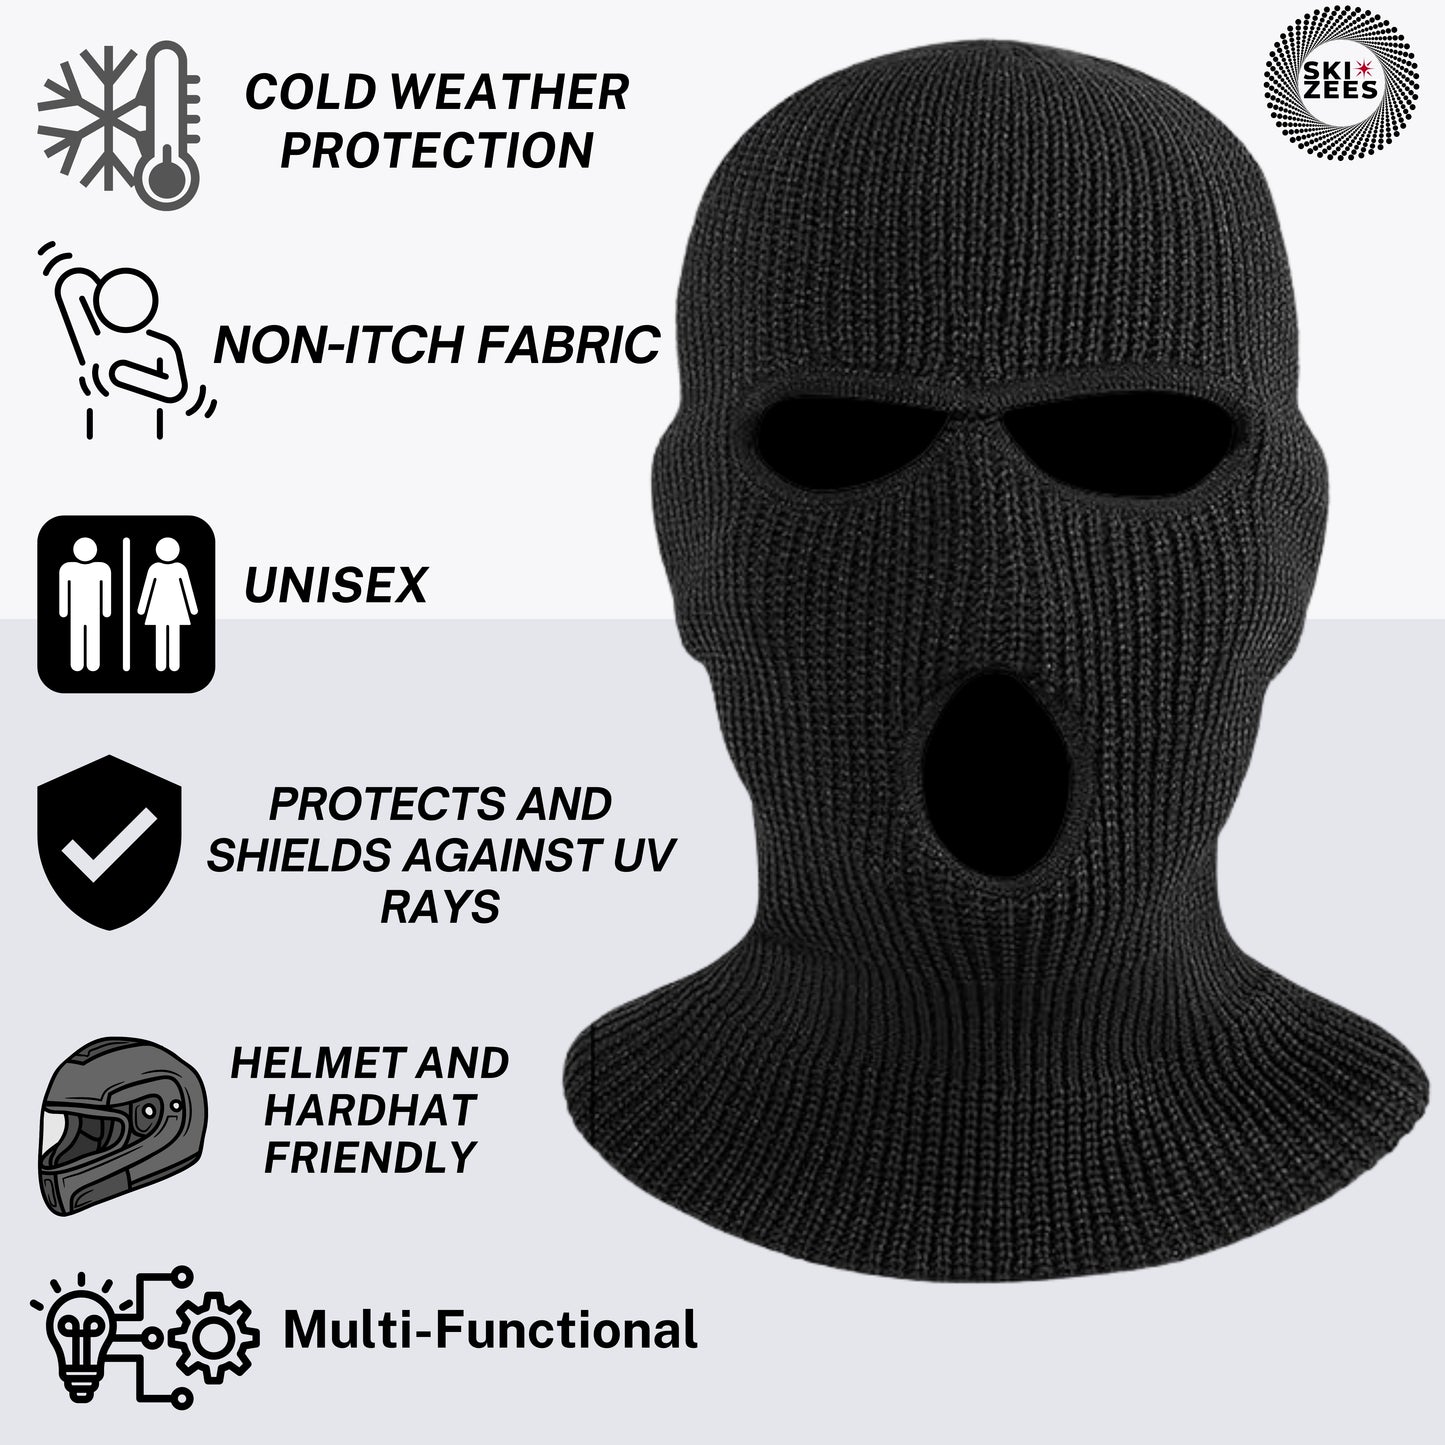 black mask has cold weather protection, non-itch fabric, unisex fashion, helmet and hardhat friendly